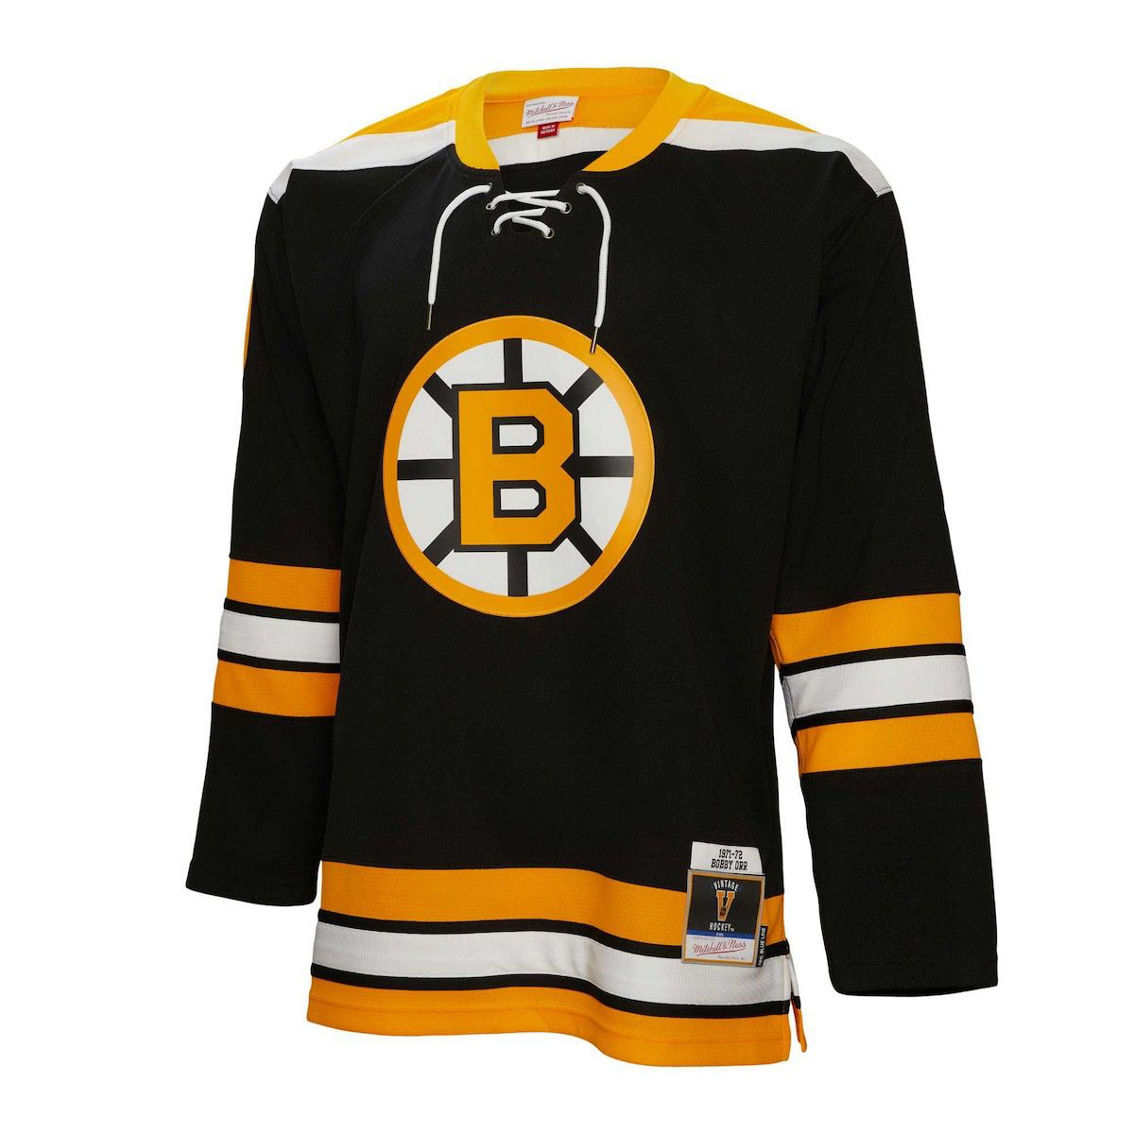 Mitchell & Ness Men's Bobby Orr Black Boston Bruins Big & Tall 1971 Blue Line Player Jersey - Image 3 of 4